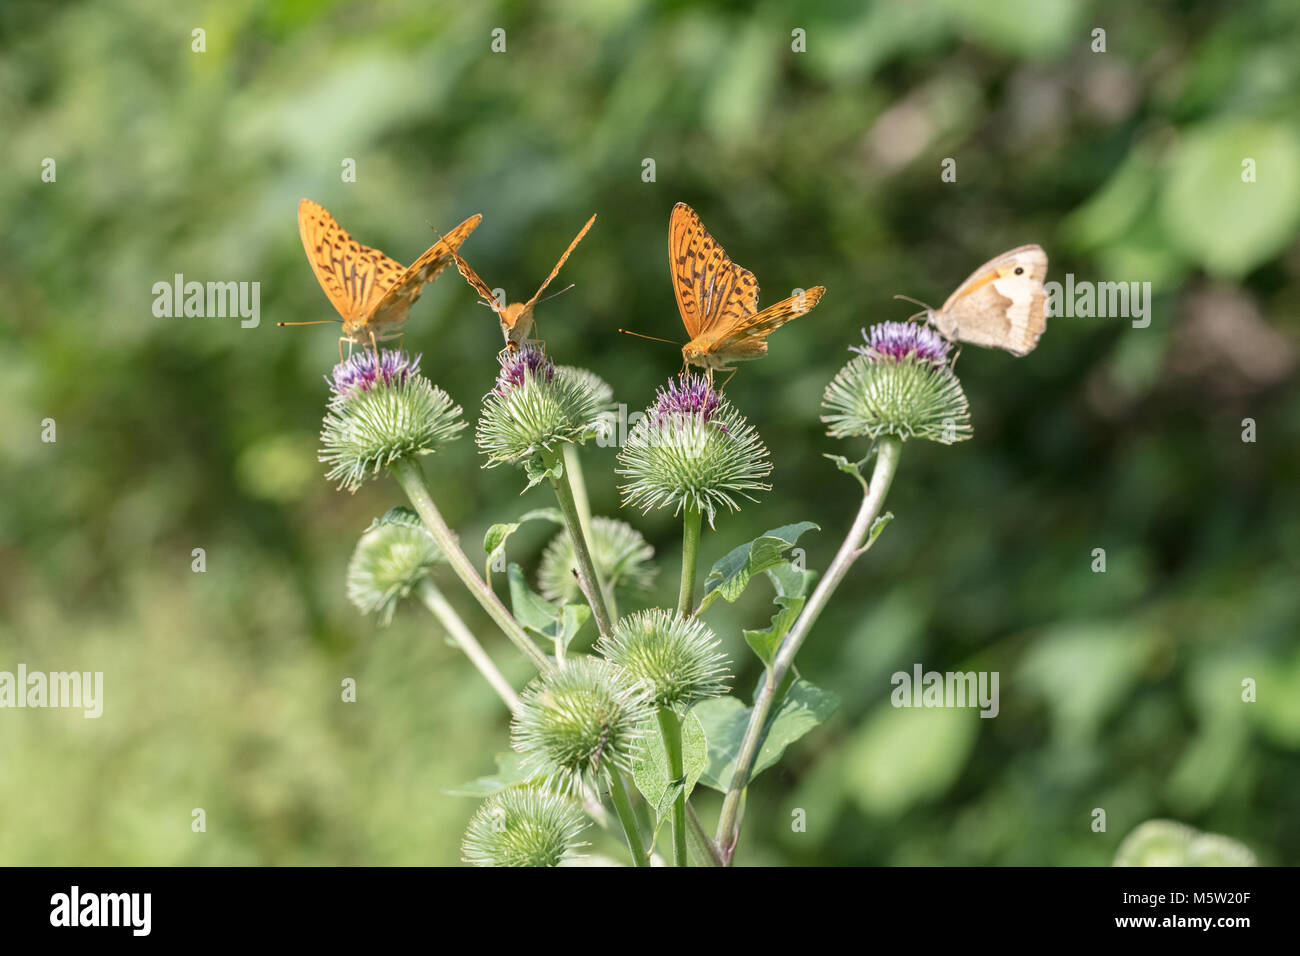 Silver-washed fritillary butterfly on thistle Stock Photo